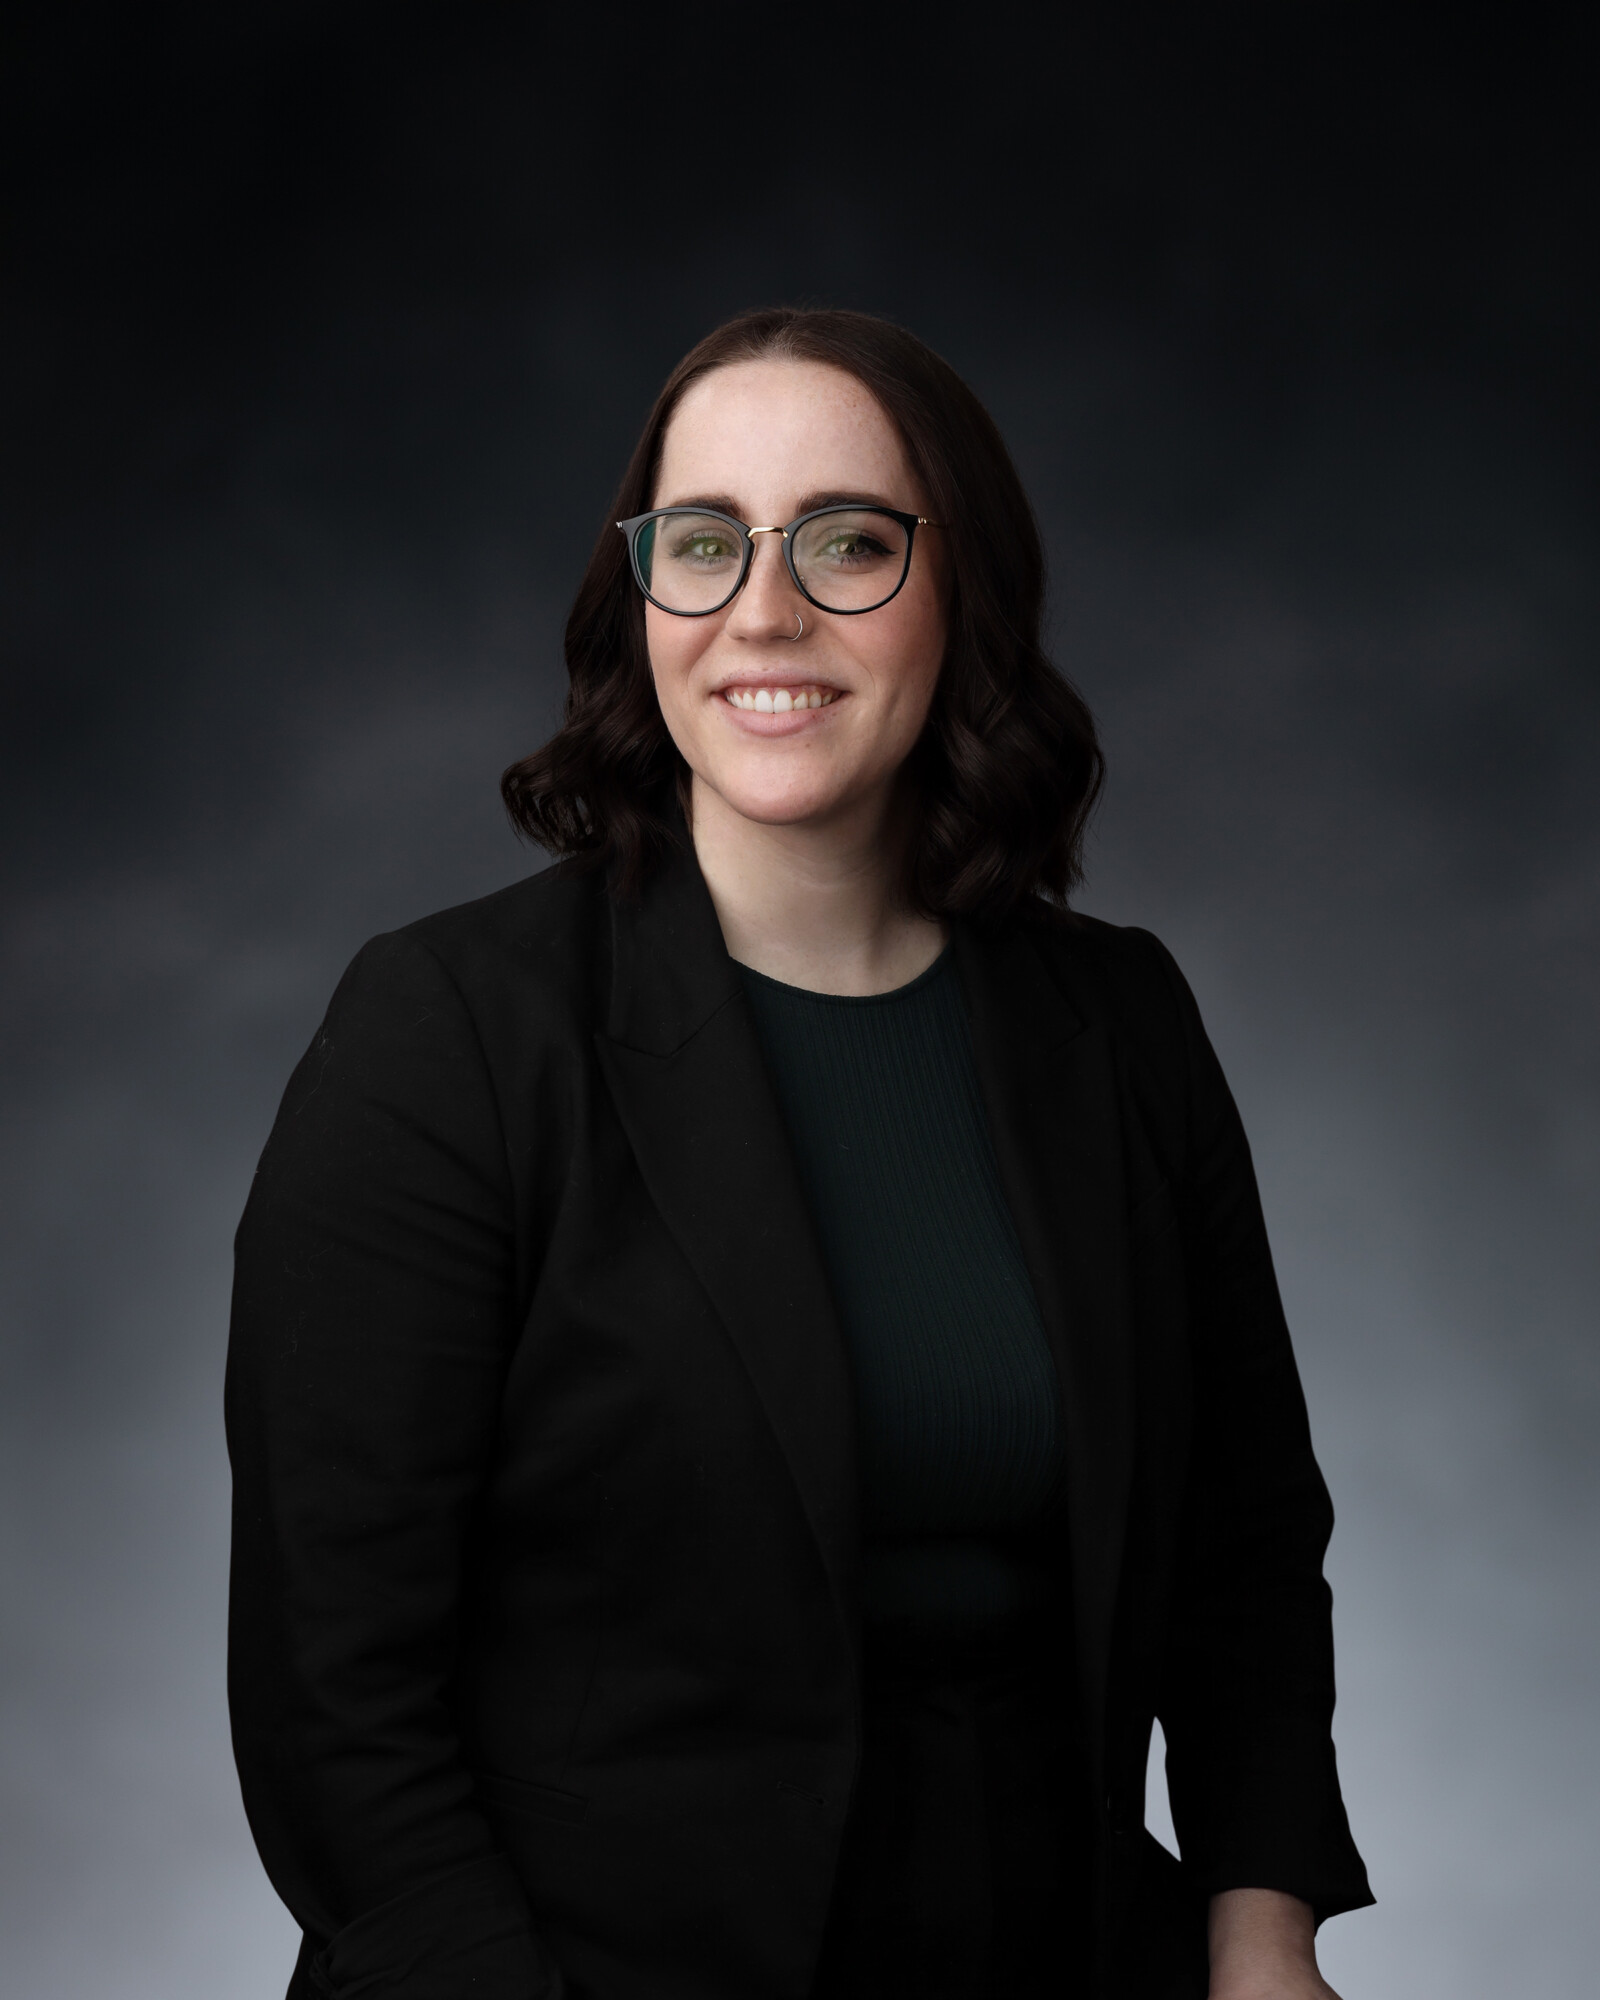 Megan Winkel, one of the Victoria lawyers from Waugh & Associates